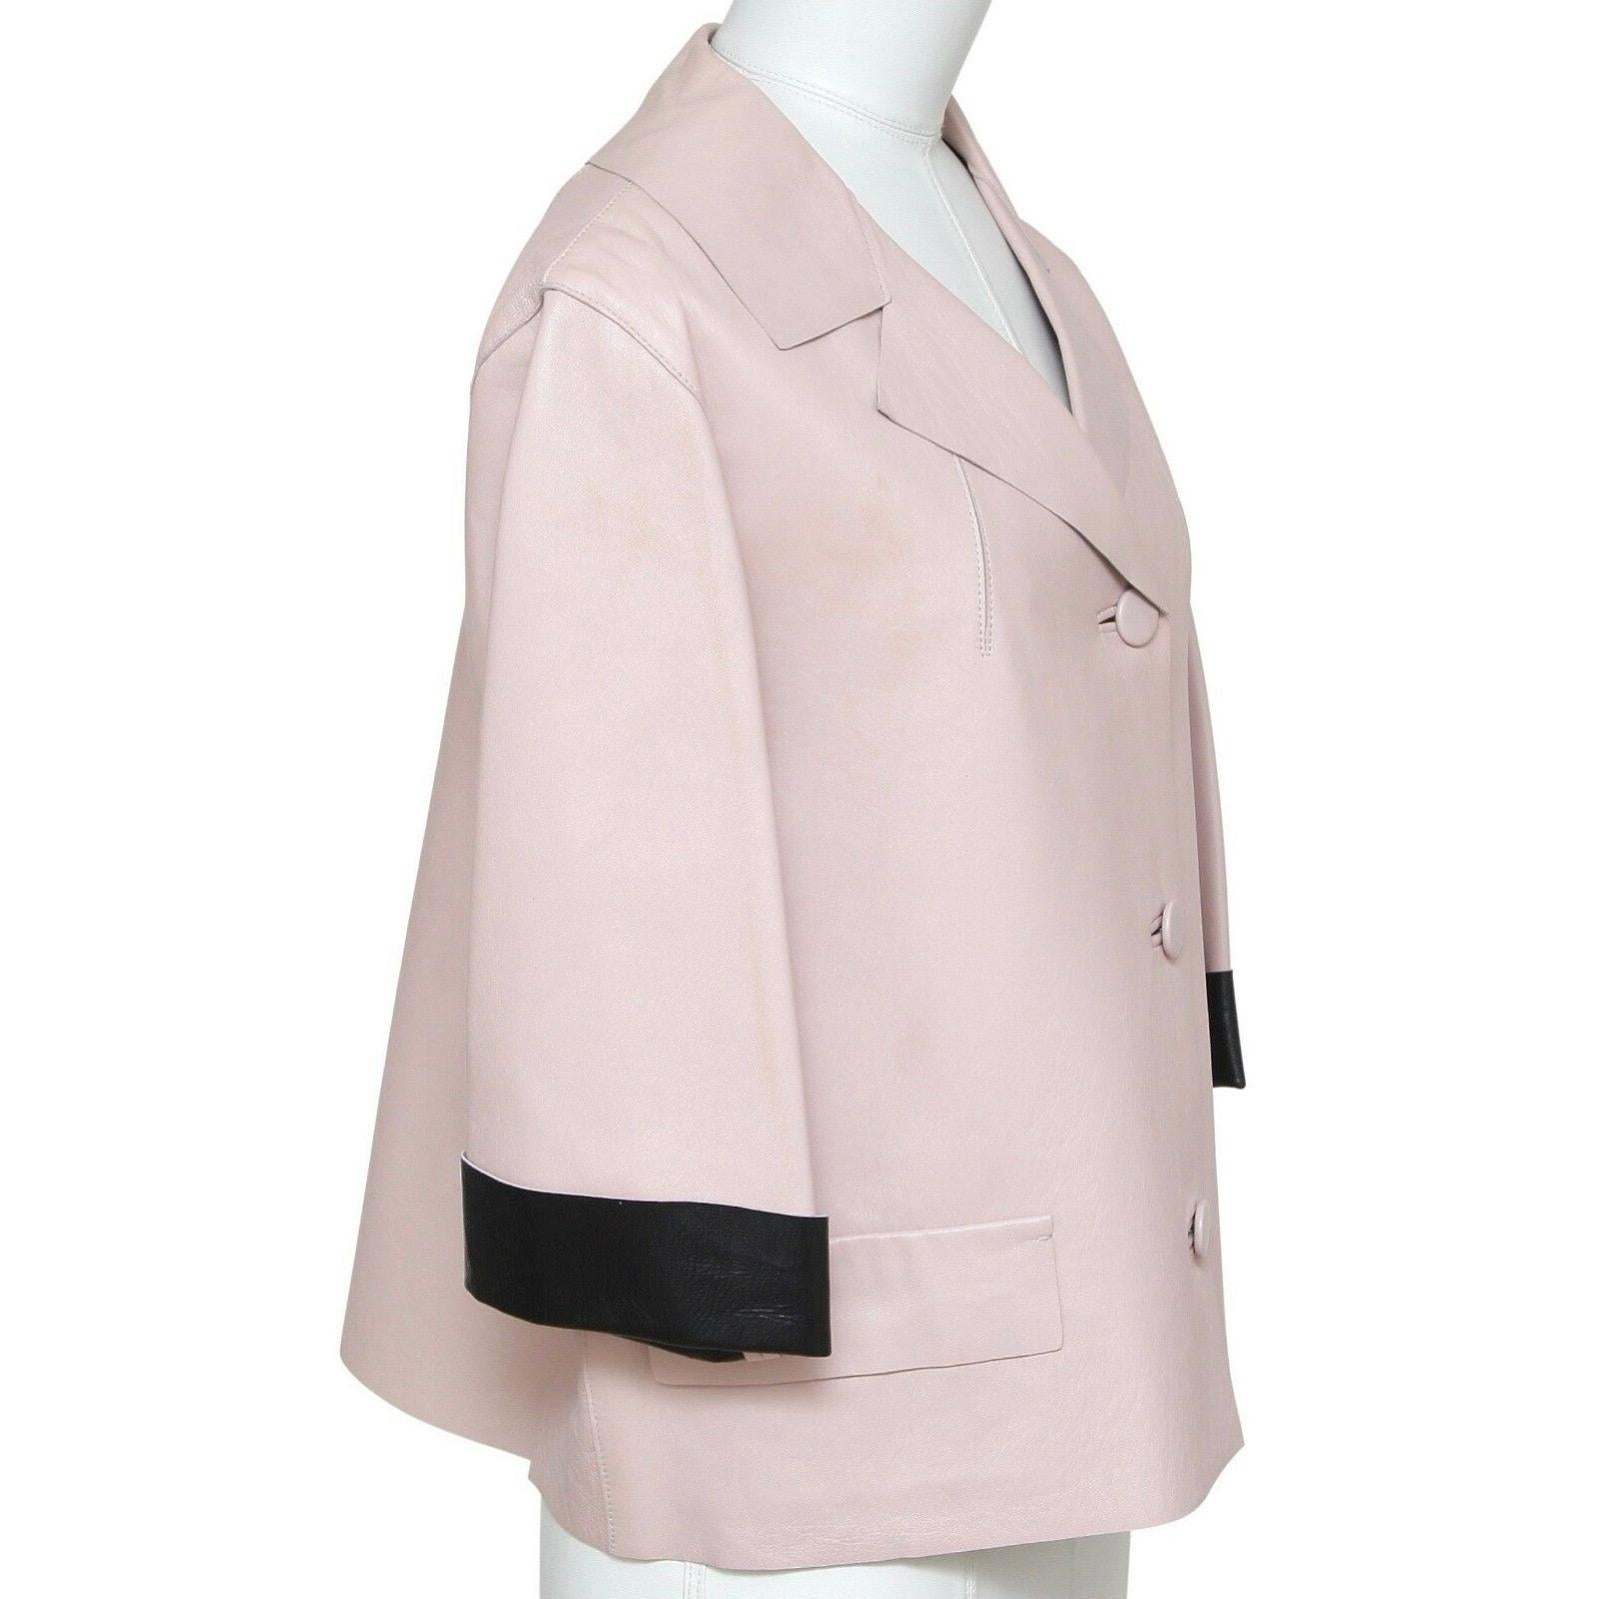 GUARANTEED AUTHENTIC MARNI BLUSH PIN LEATHER JACKET WITH BLACK LEATHER LINING

Retail excluding sales taxes $3,370


Design:
 • Fresh blush pink color leather jacket.
 • Black leather interior lining.
 • Notched lapel, 3 button front and dual flap